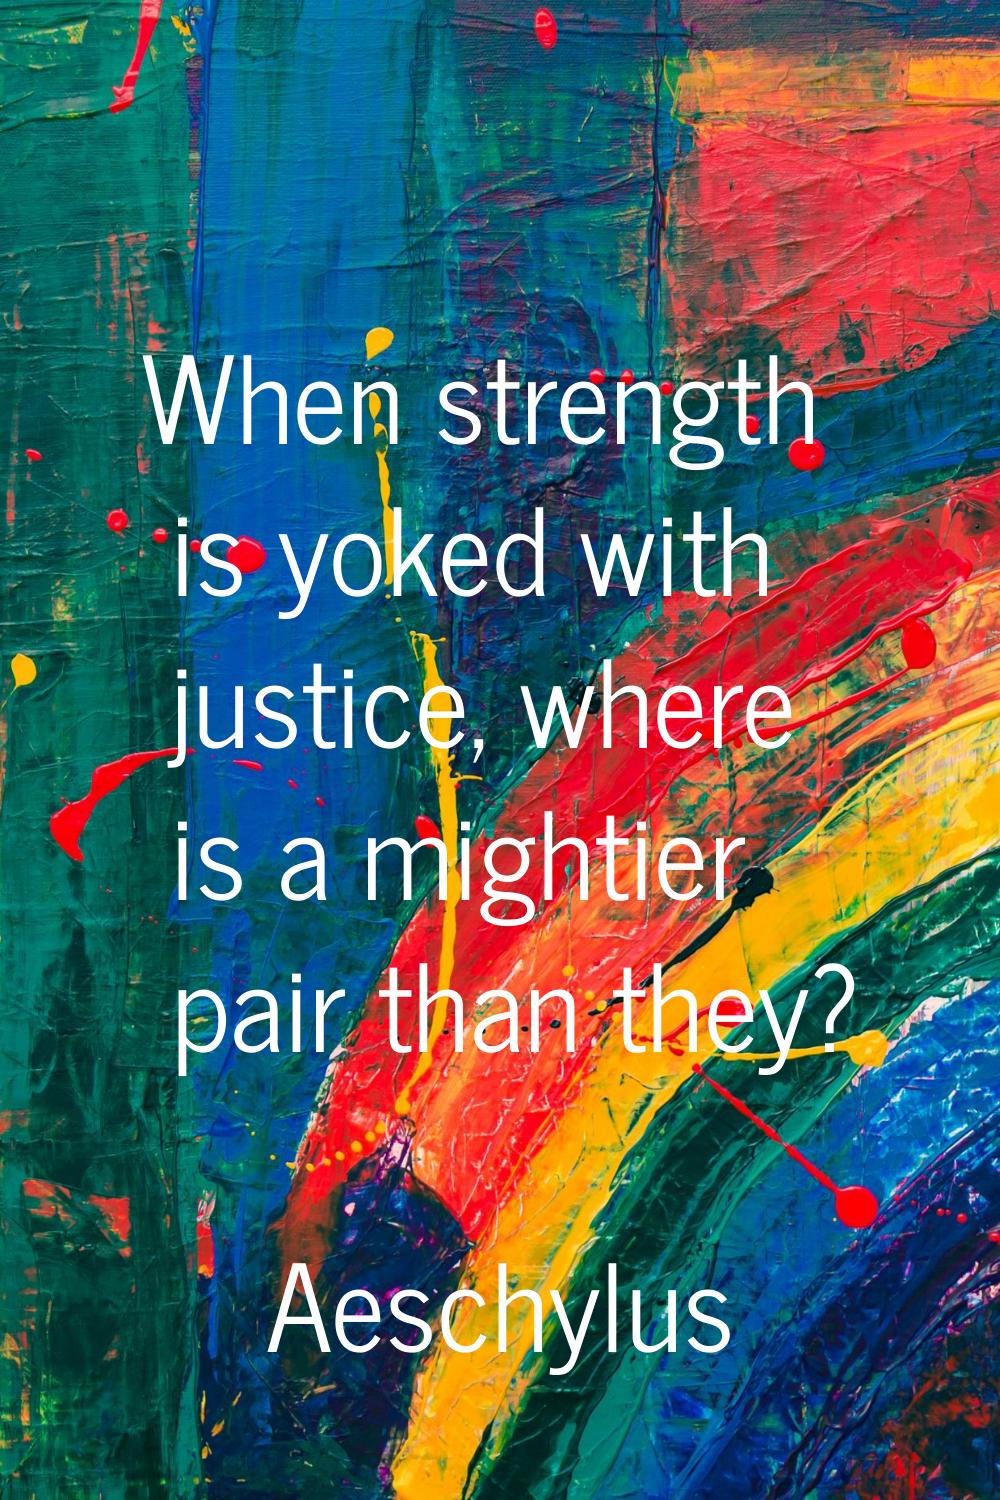 When strength is yoked with justice, where is a mightier pair than they?